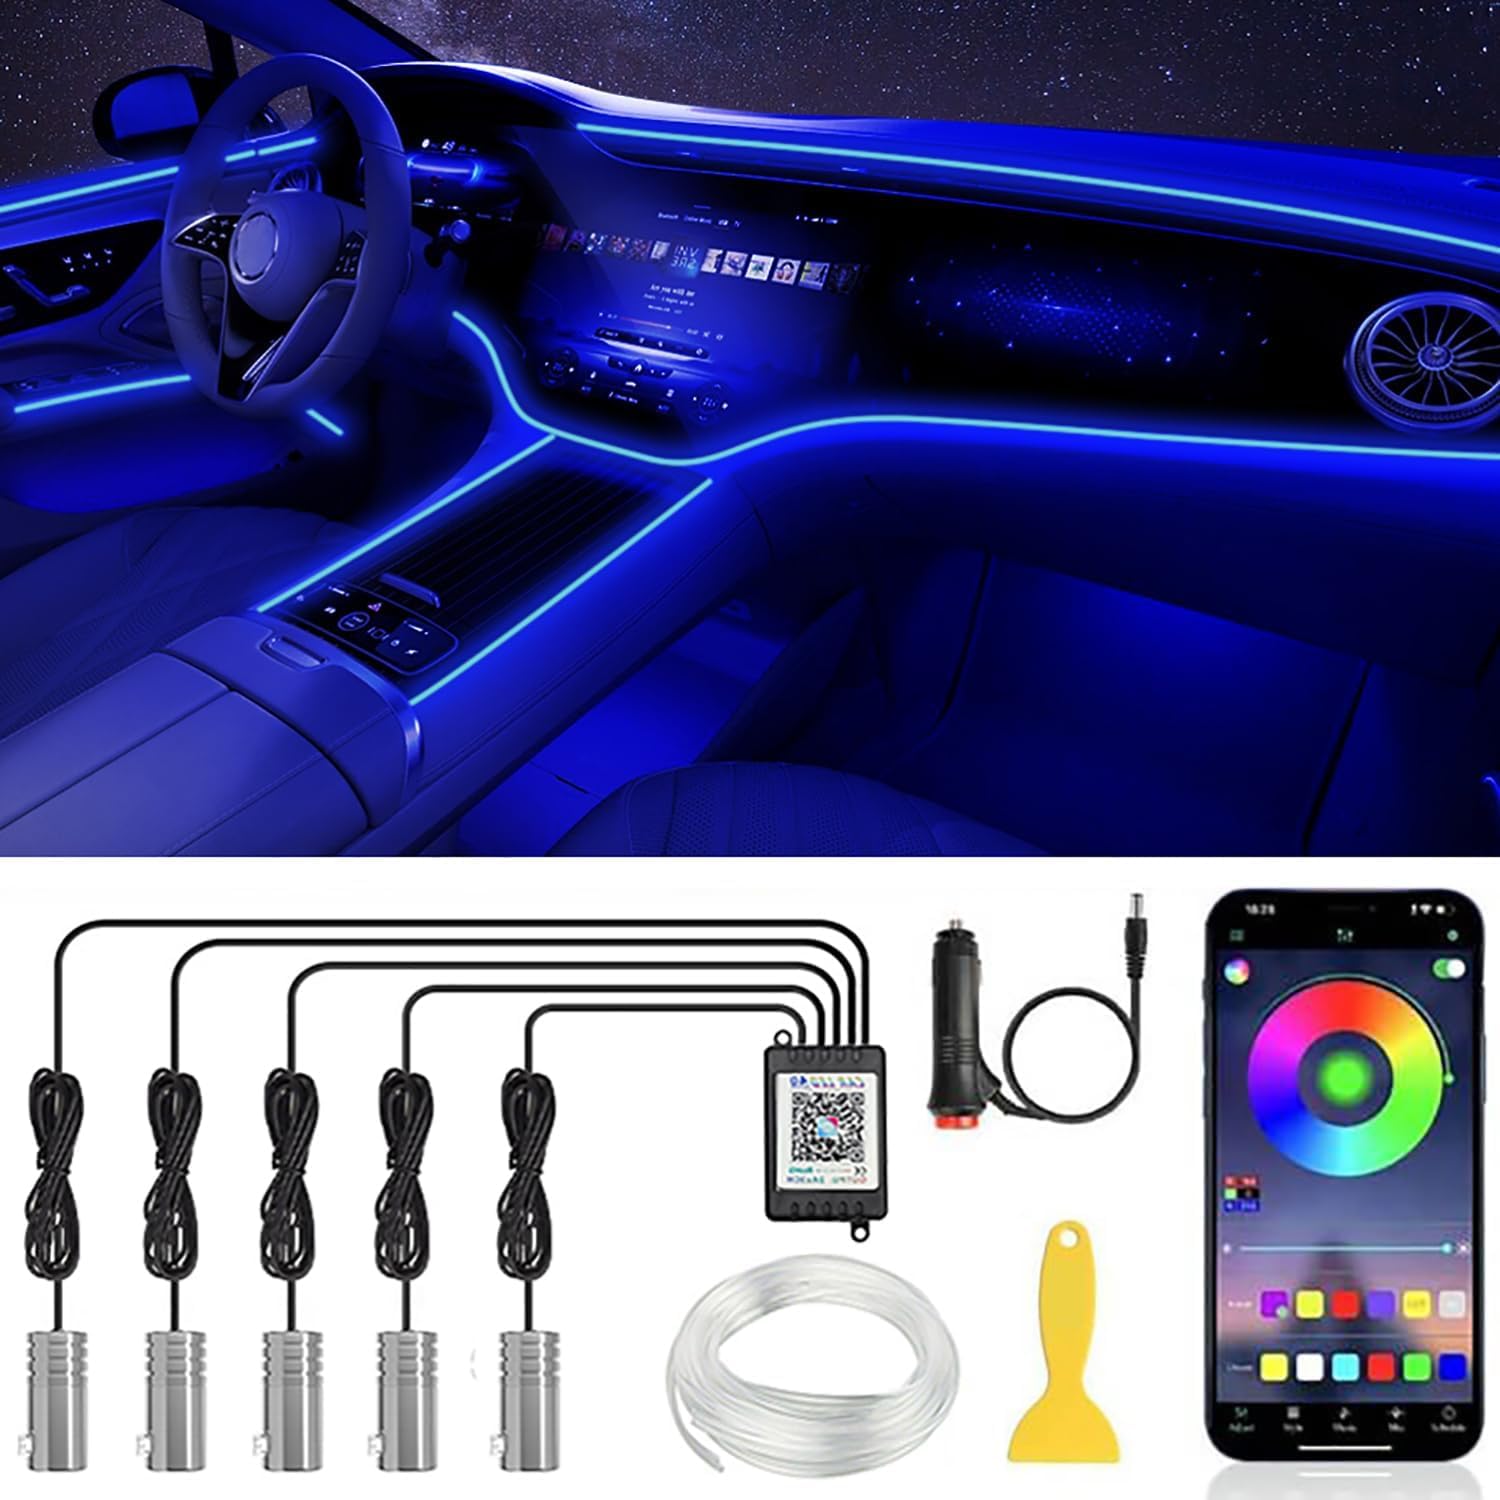 LED Innenbeleuchtung Auto,6M/5 in 1 RGB Auto Innenraumbeleuchtung,12V Led Atmosphäre Licht Auto,App Steuerbare Innenbeleuchtung,Auto LED Streifen von Shengruili